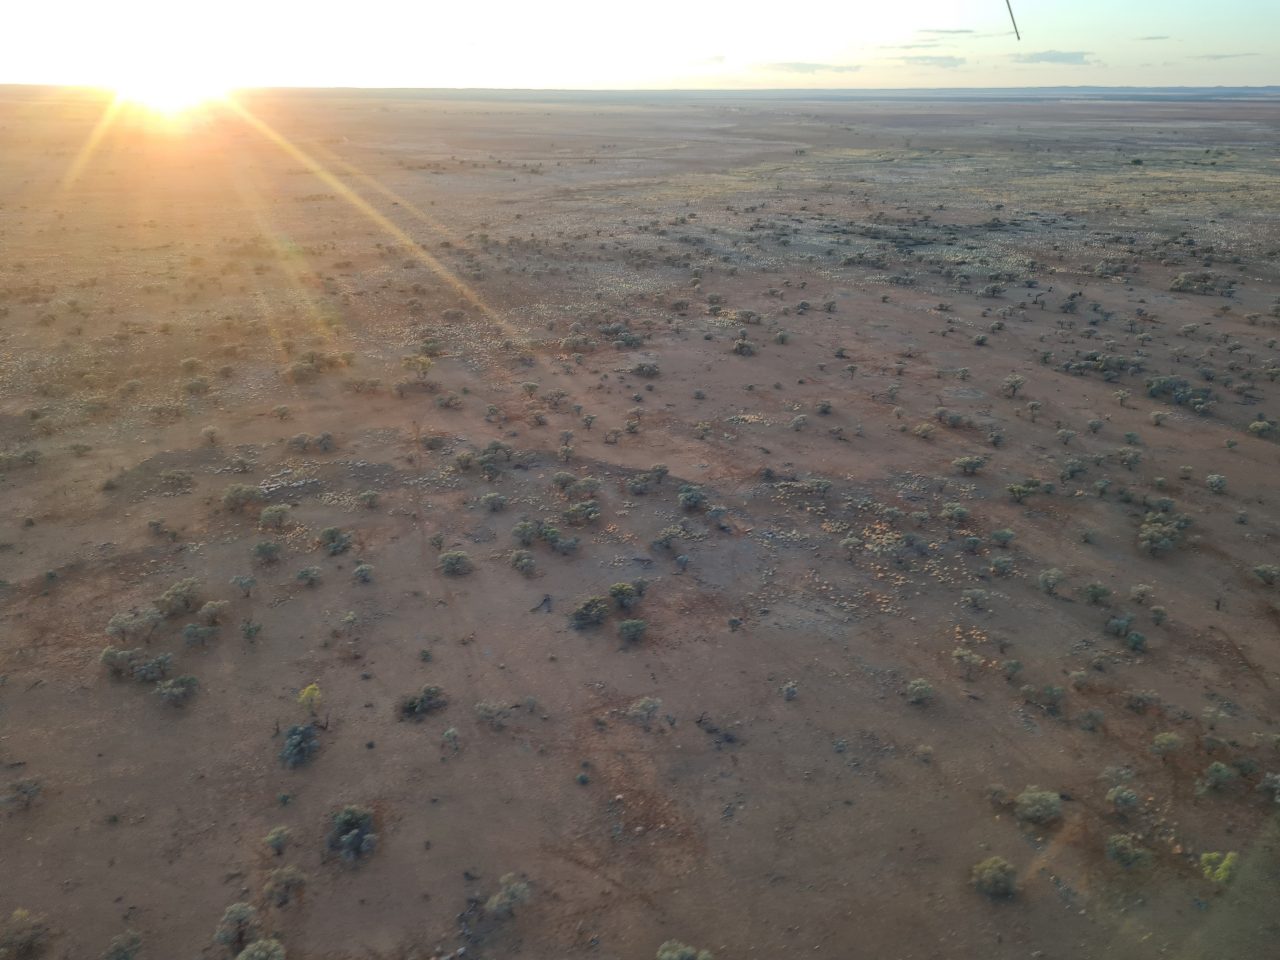 Photo from air of sparsely vegetated outback floodplain with orange soil as sun appears above horizon in a glowing ball casting sun rays over the landscape